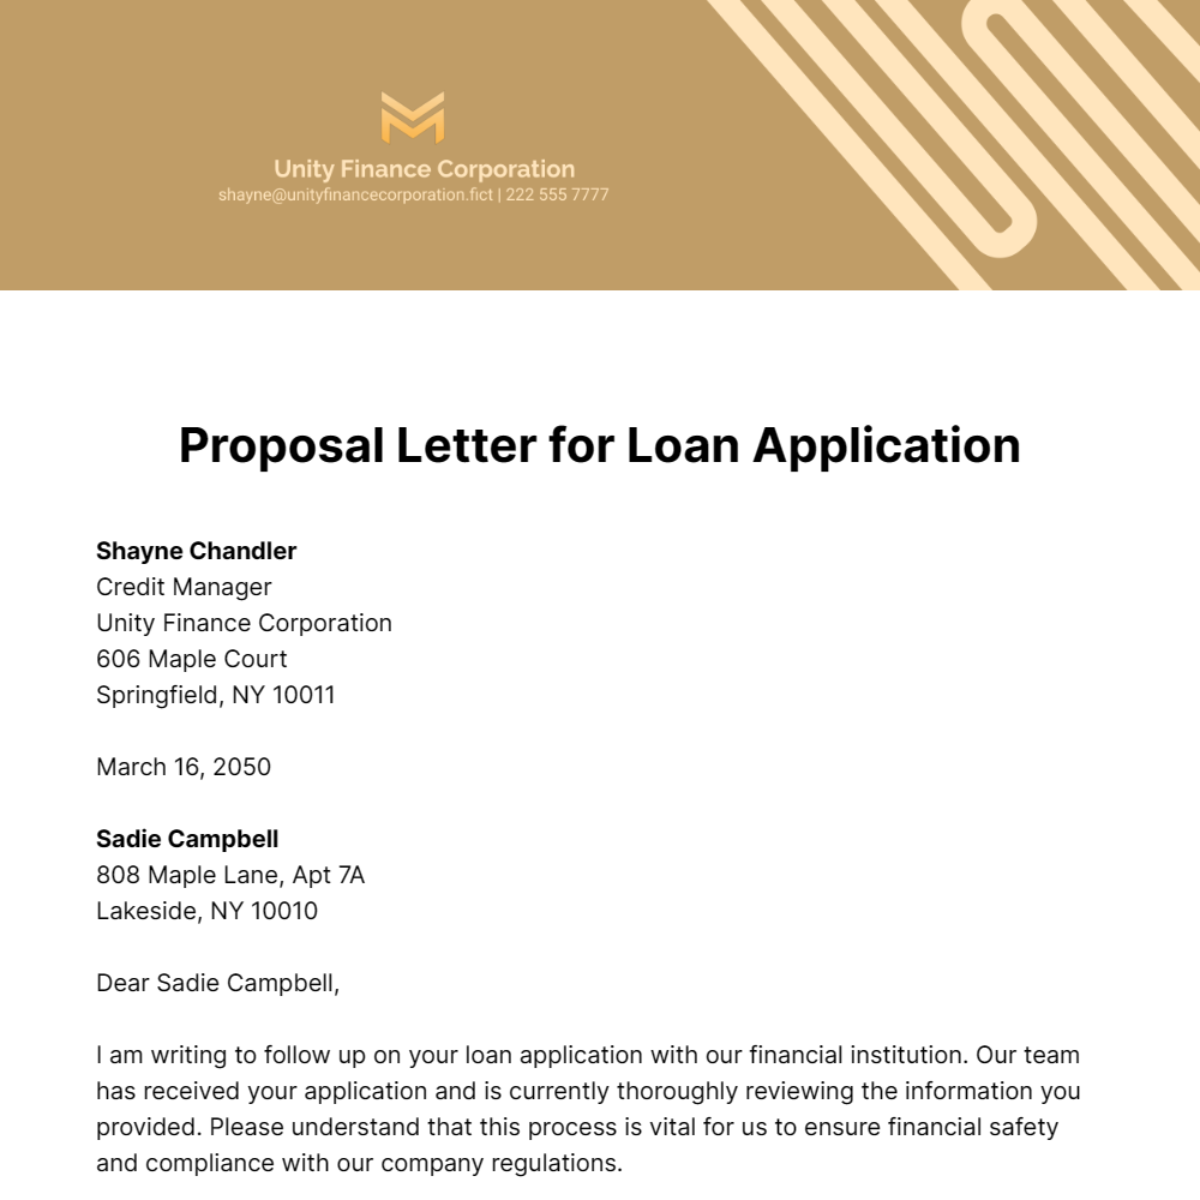 Proposal Letter for Loan Application Template